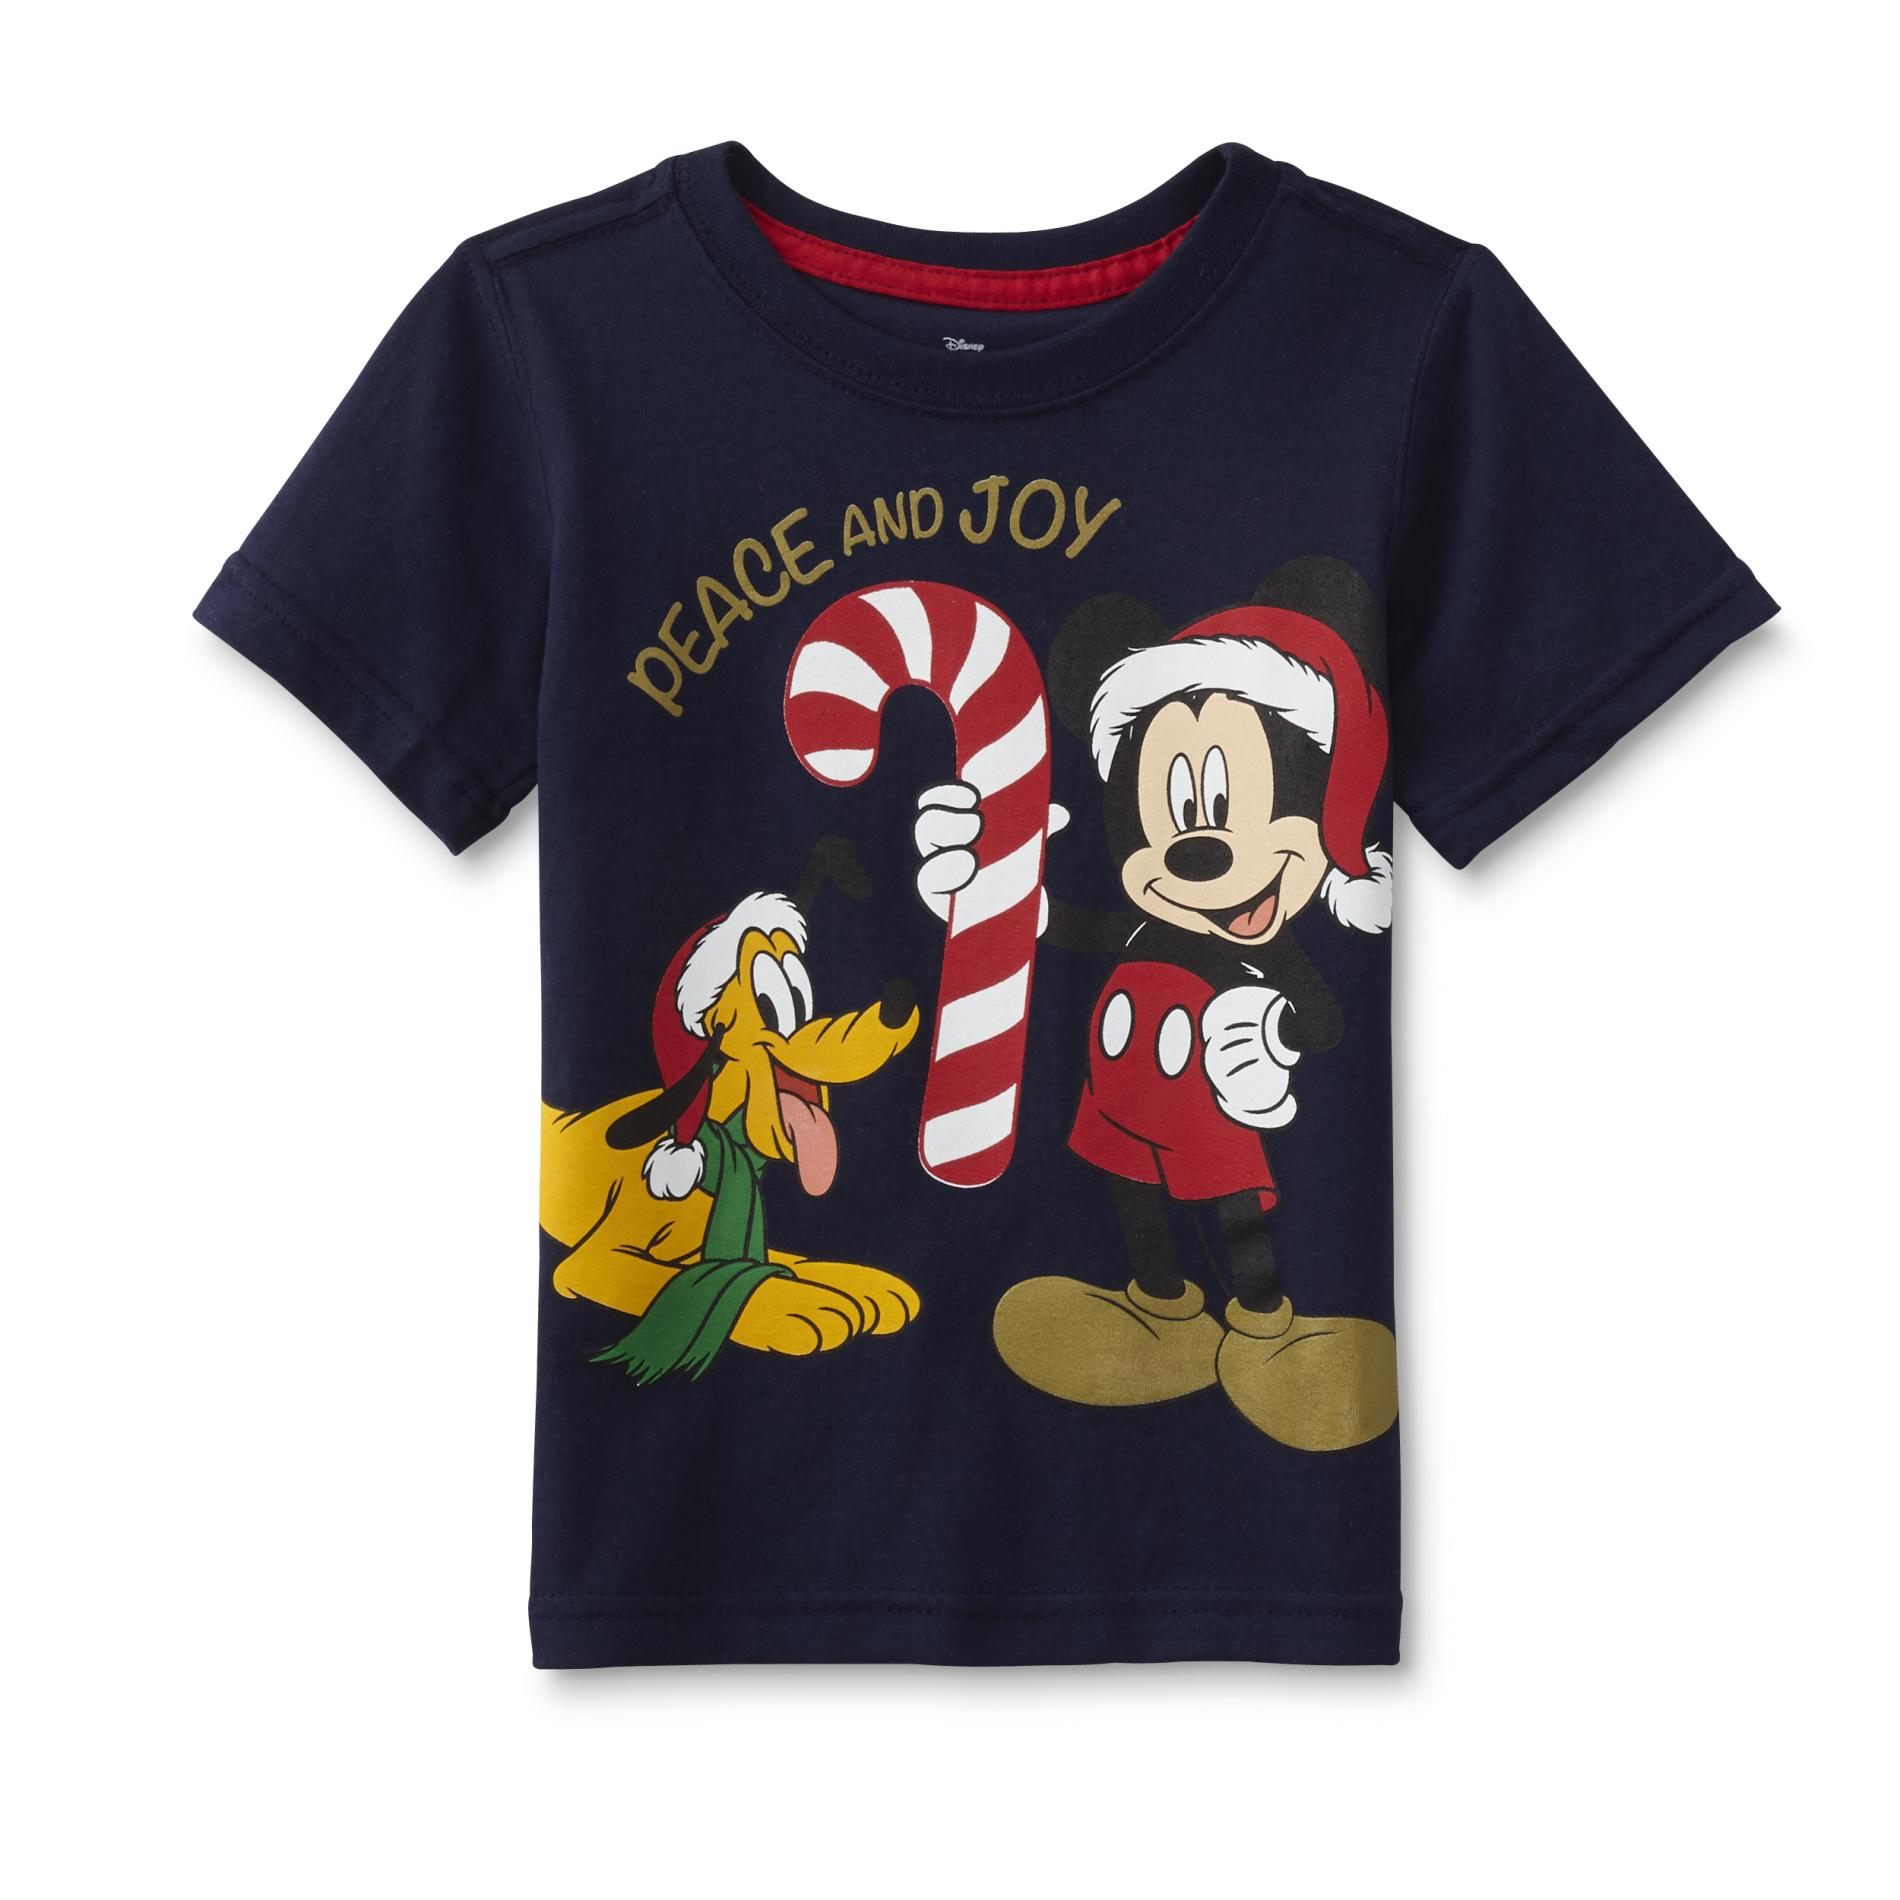 Disney Mickey Mouse Toddler Boys' Christmas Graphic T-Shirt